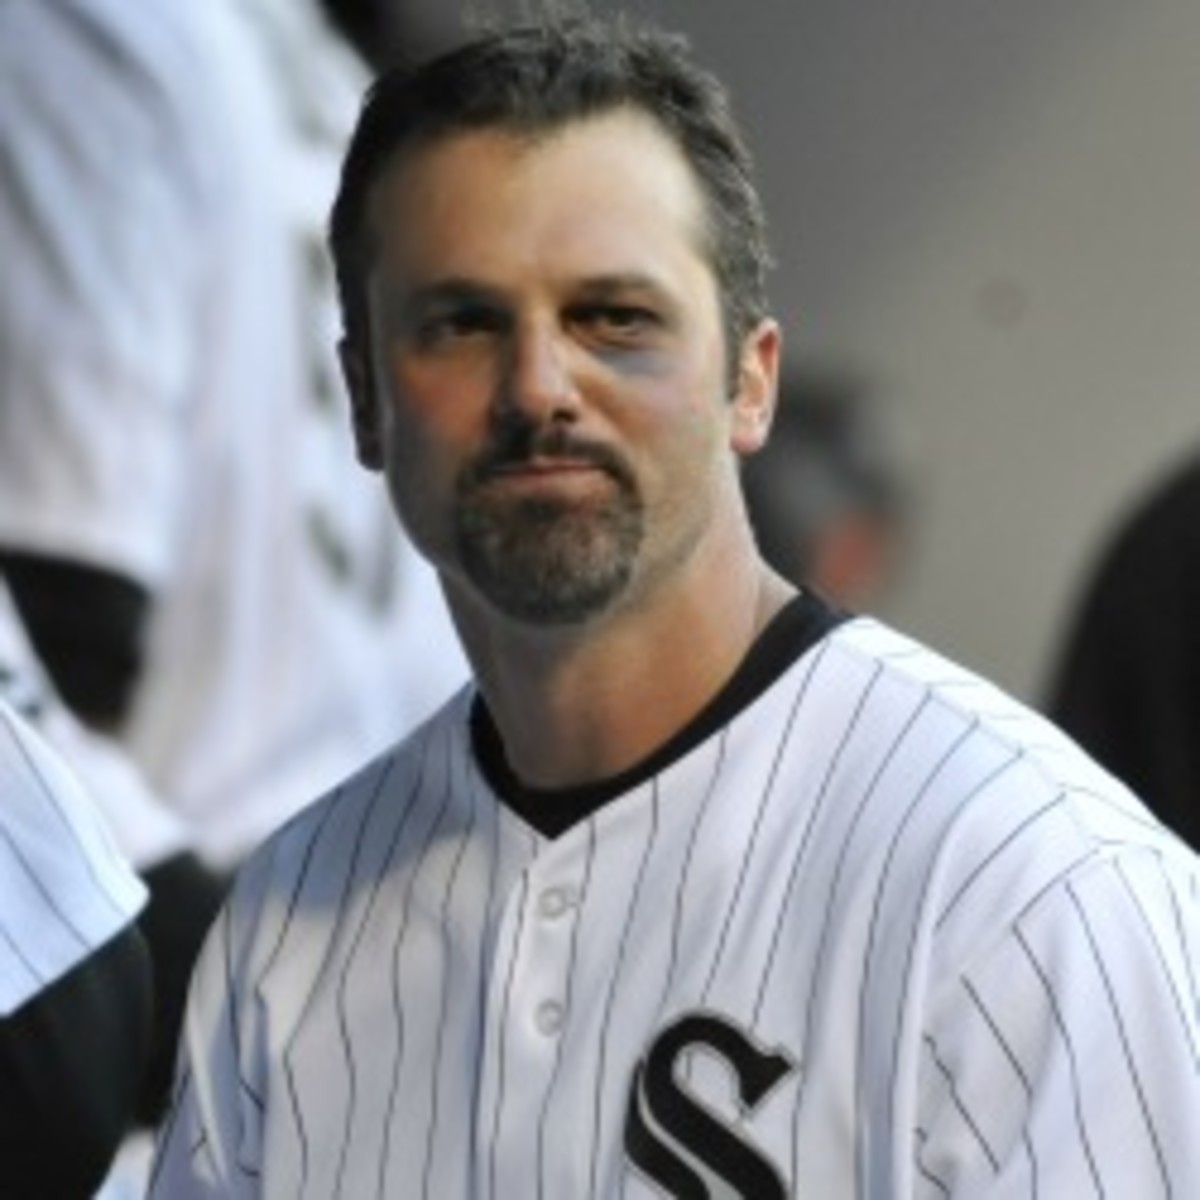 White Sox first baseman Paul Konerko turned down the WBC because he did not feel he could be ready to play in March. (David Banks/Getty Images)